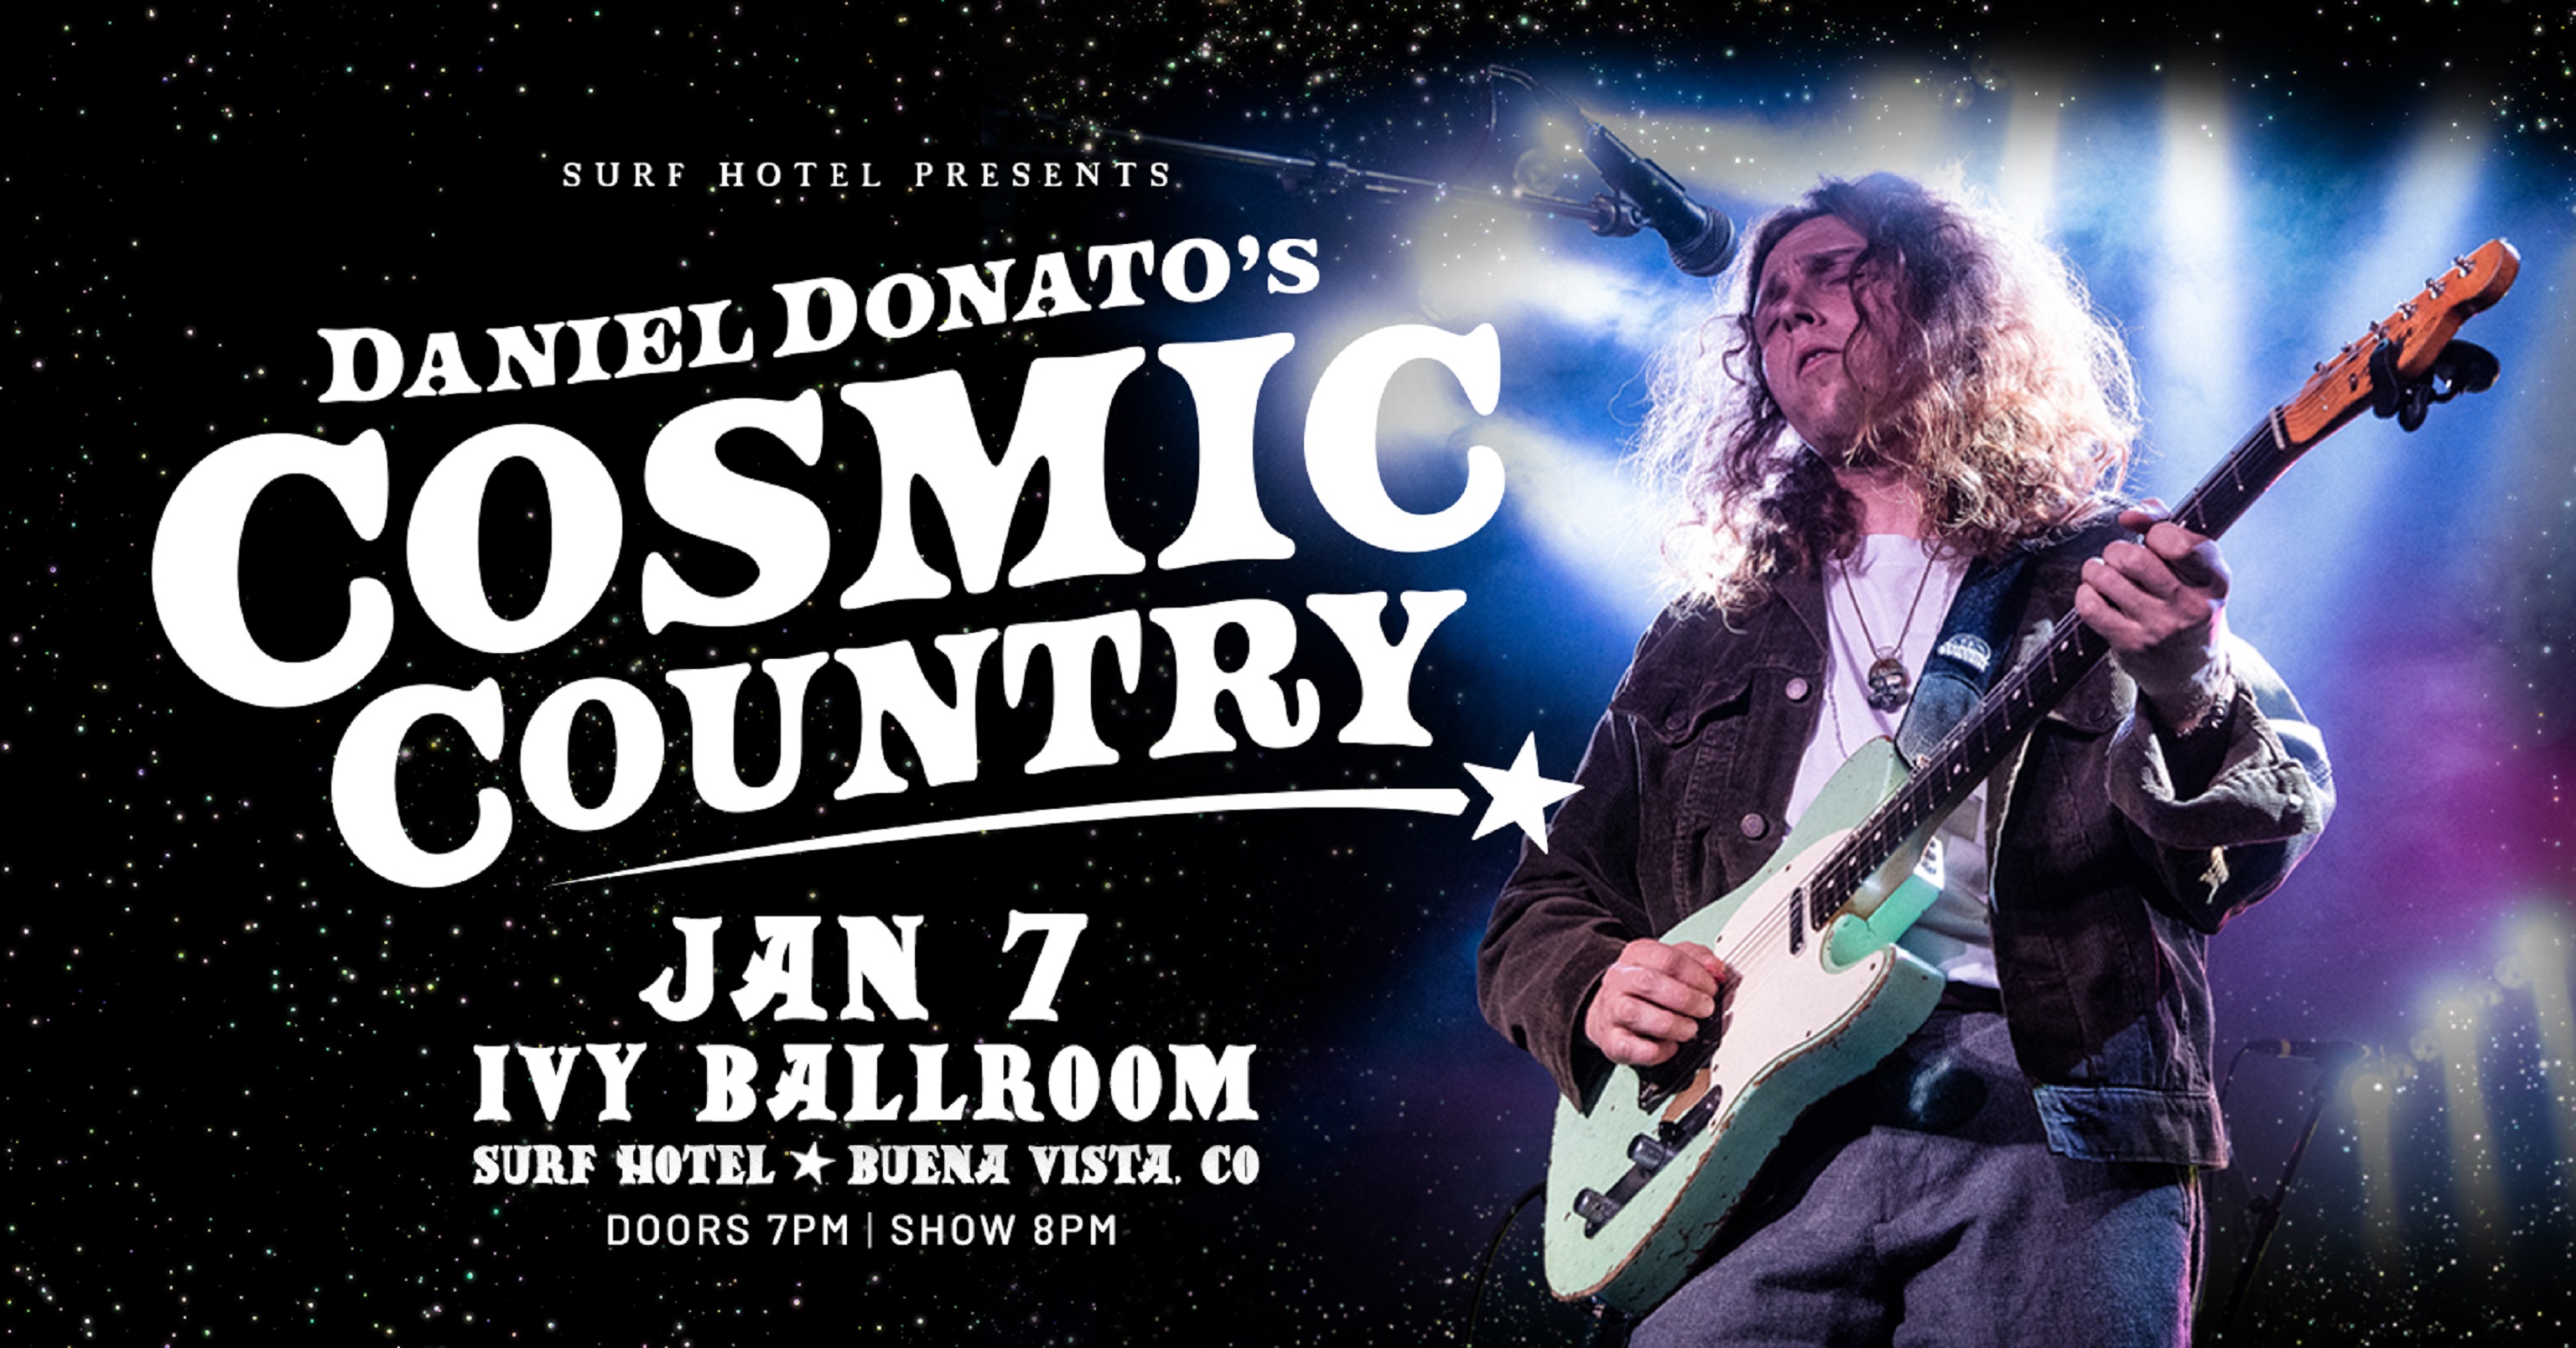 An Evening with Daniel Donato’s Cosmic Country in the Ivy Ballroom at Surf Hotel 